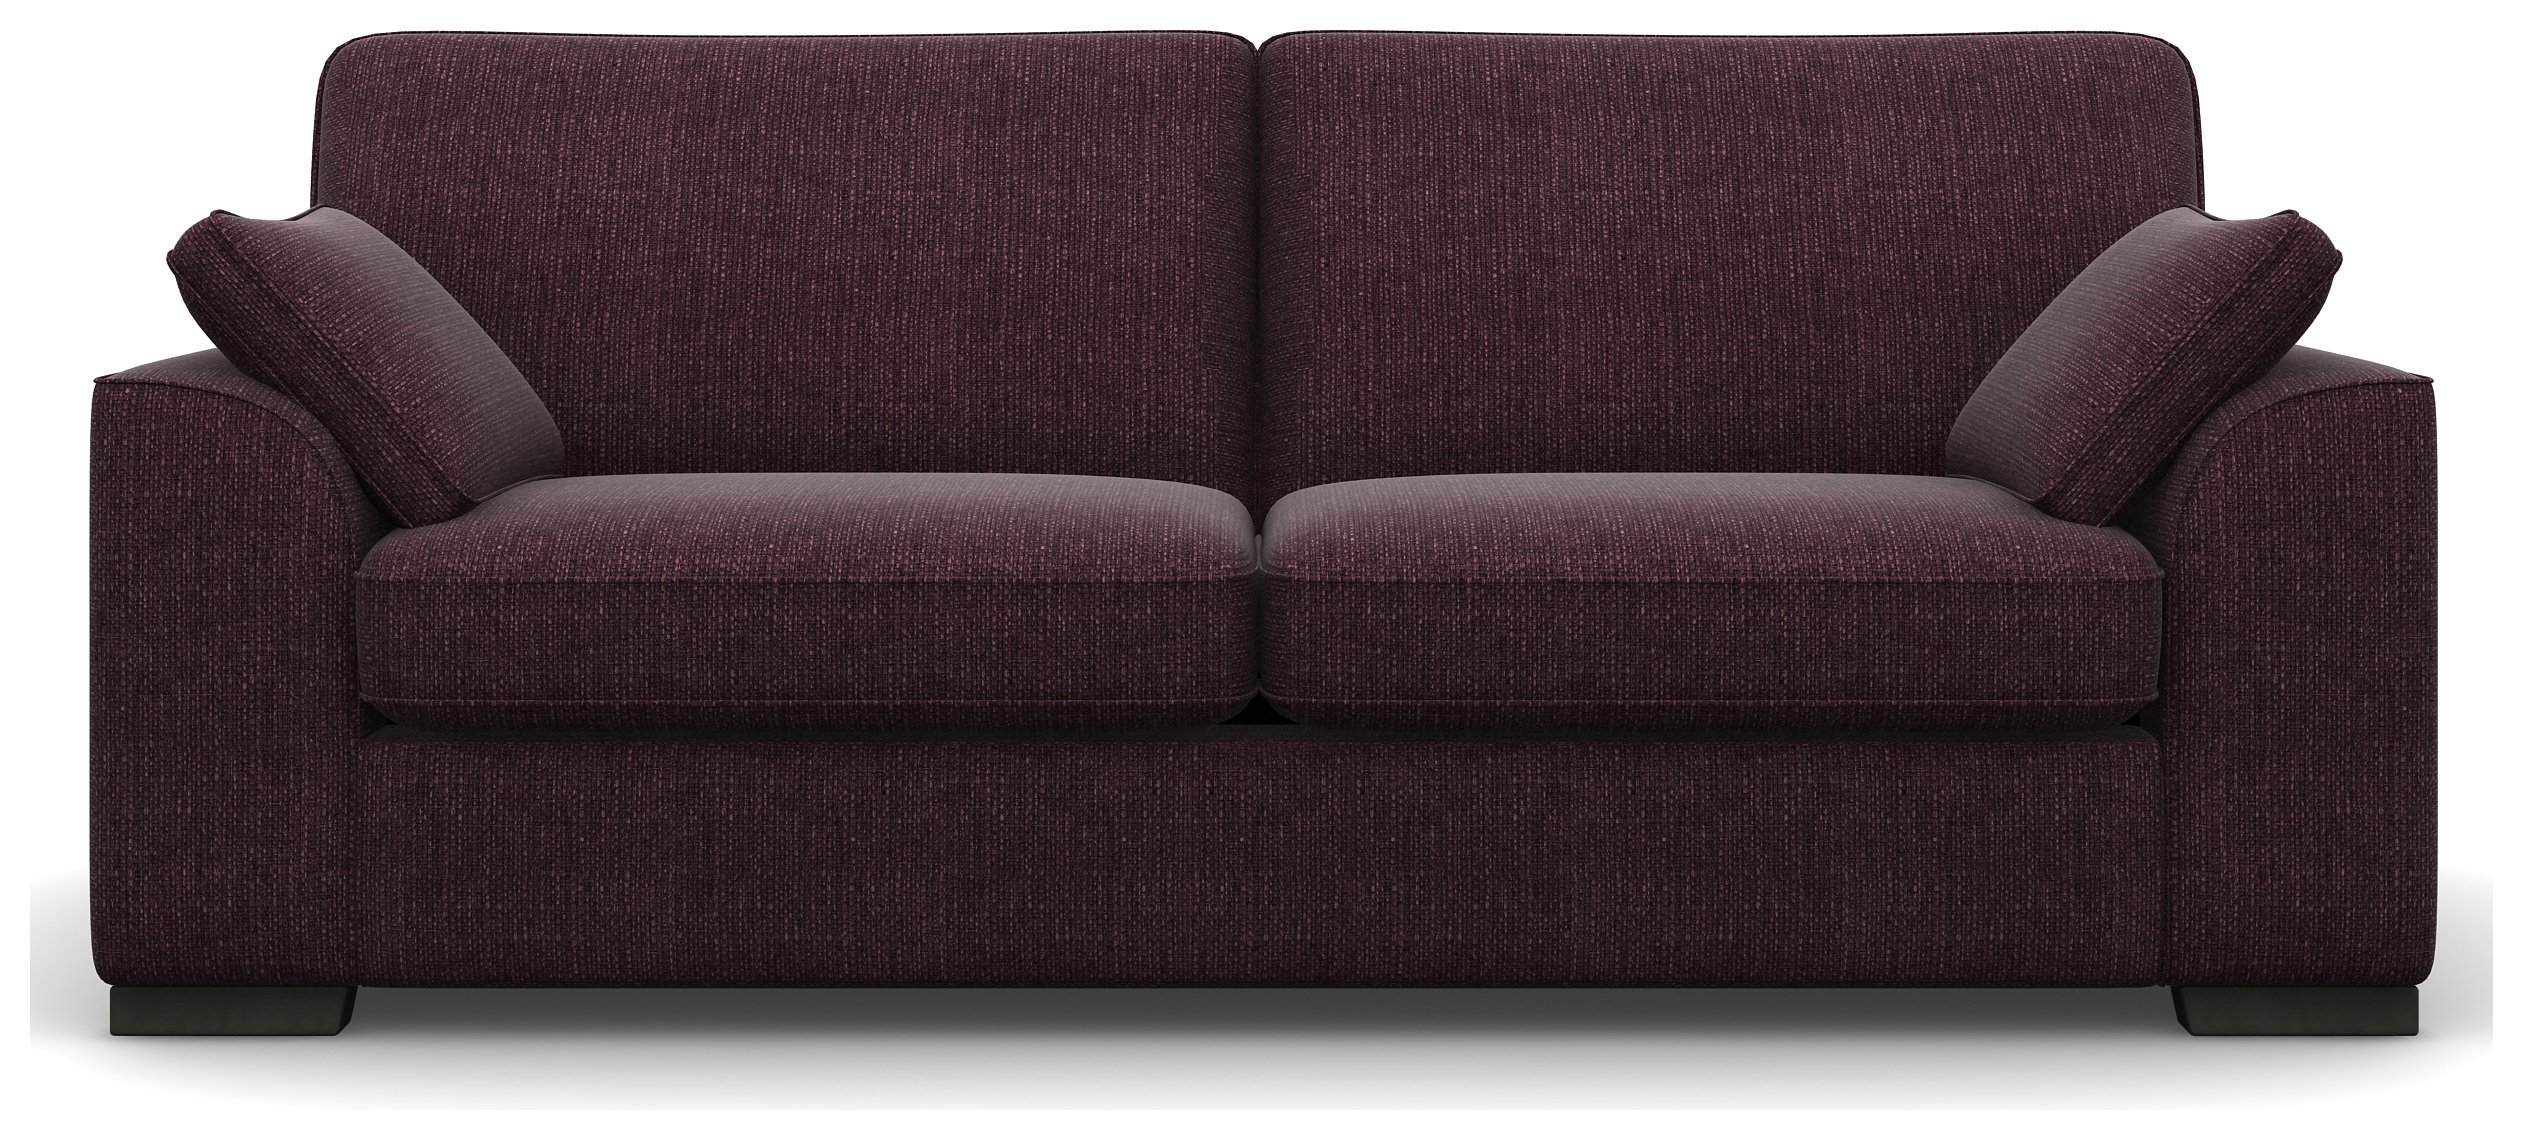 lincoln sofa bed review